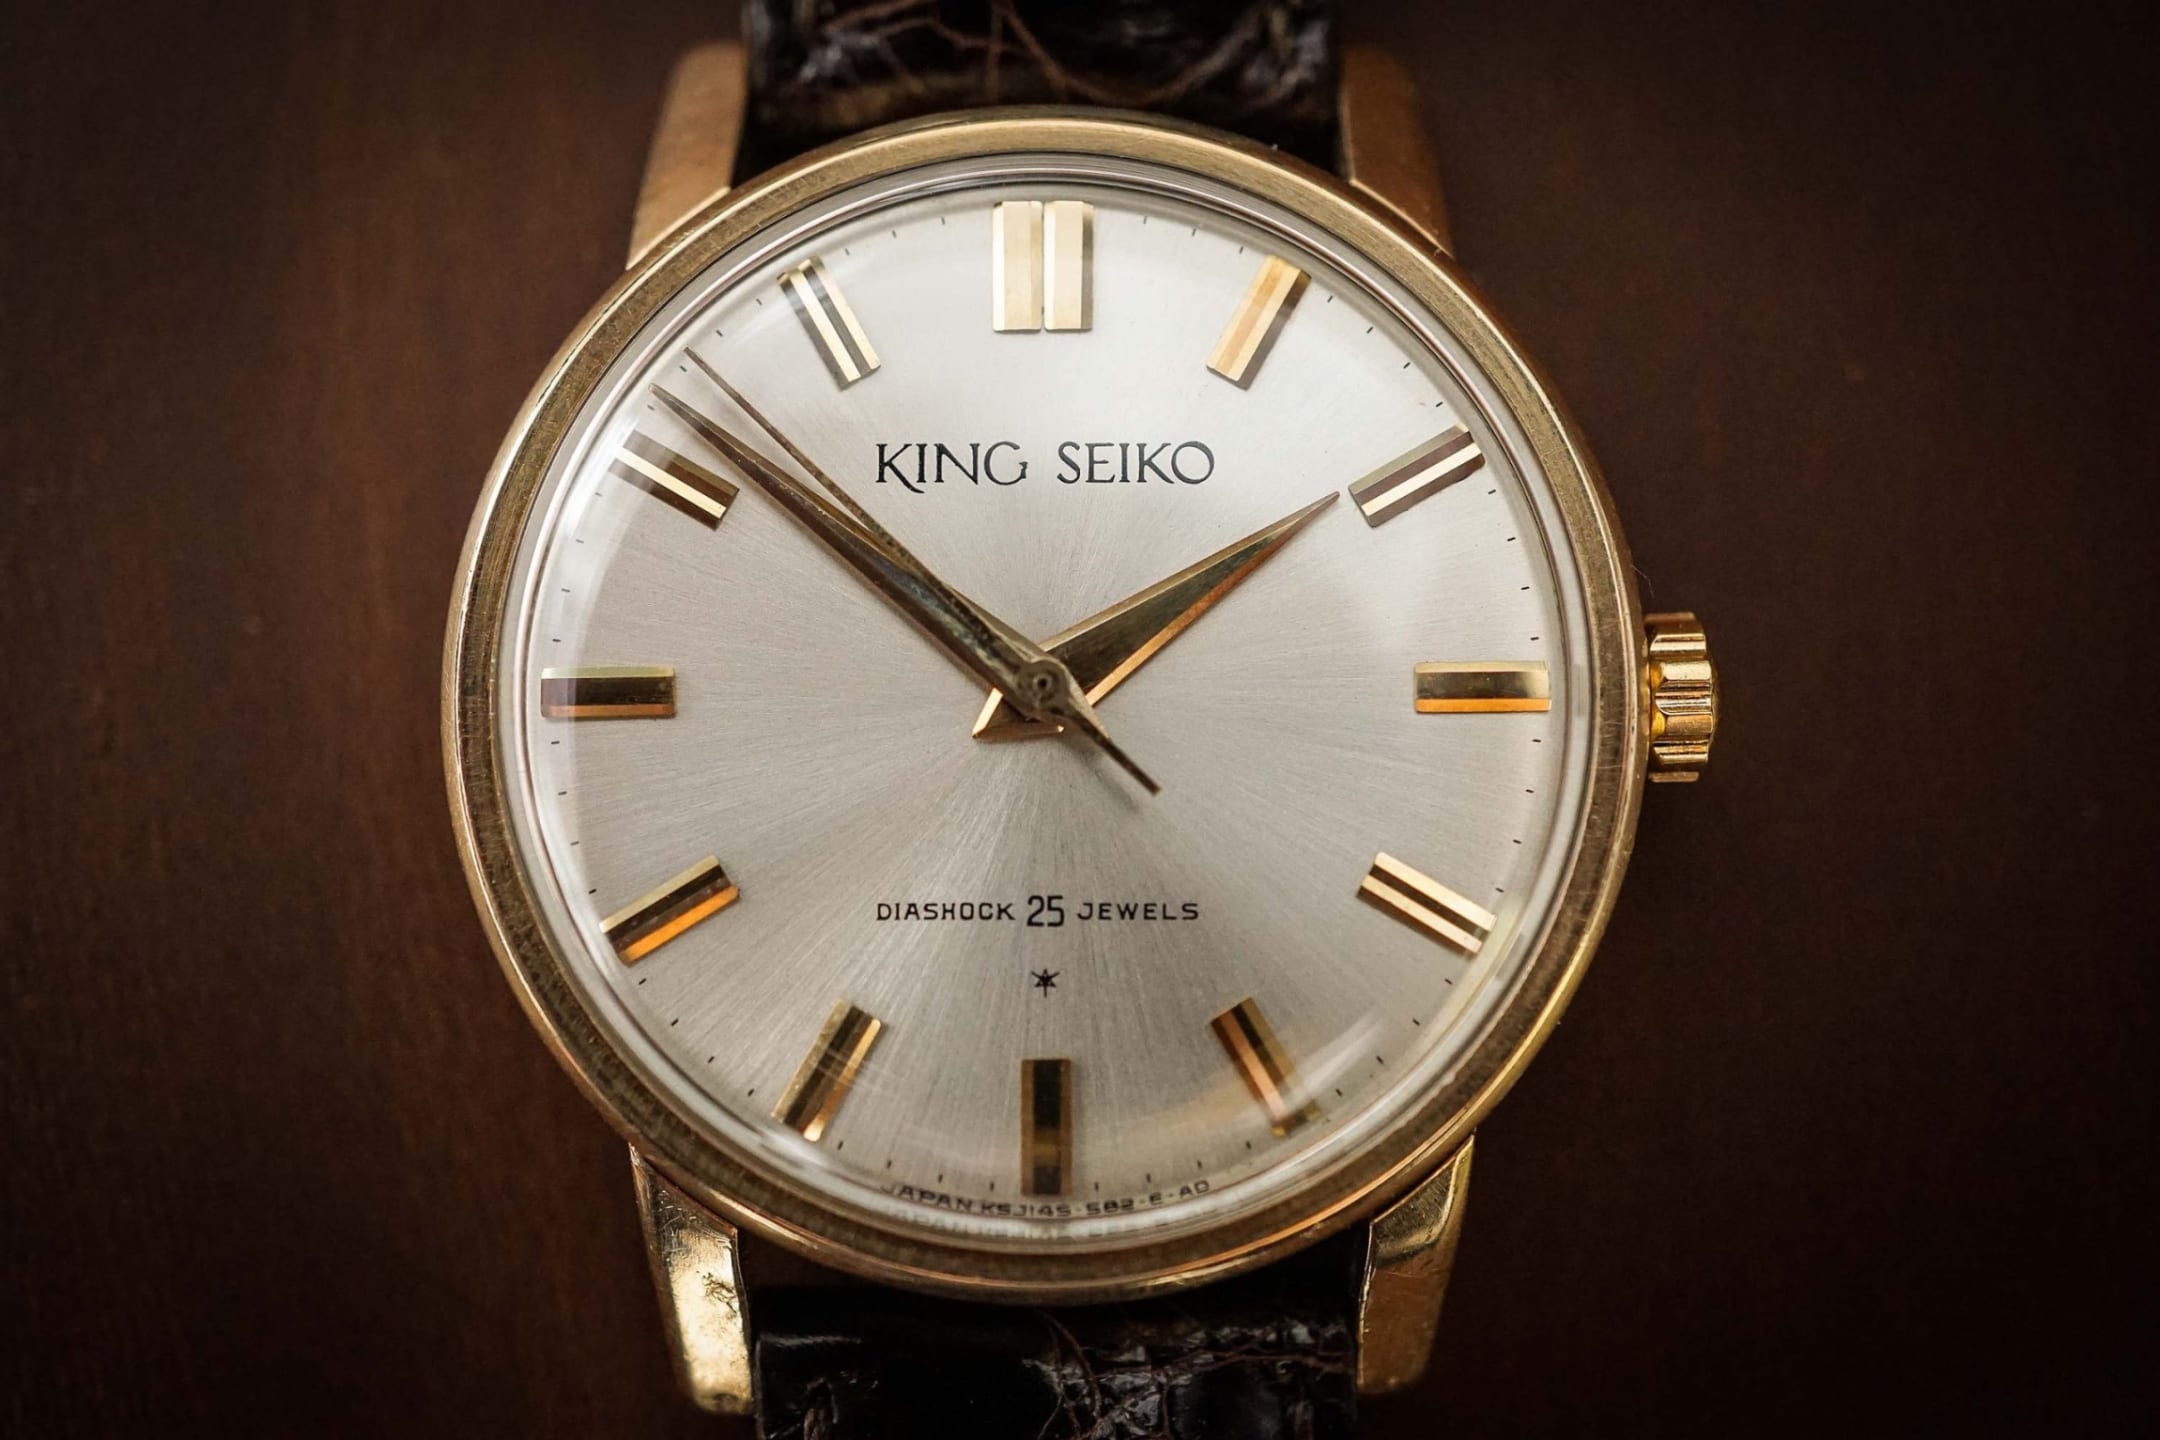 Despite producing respectable models like the 44KS, King Seiko lagged behind Grand Seiko, which excelled and shared similarities with the 44GS, albeit slightly less accuracy Photo: Beyond The Dial